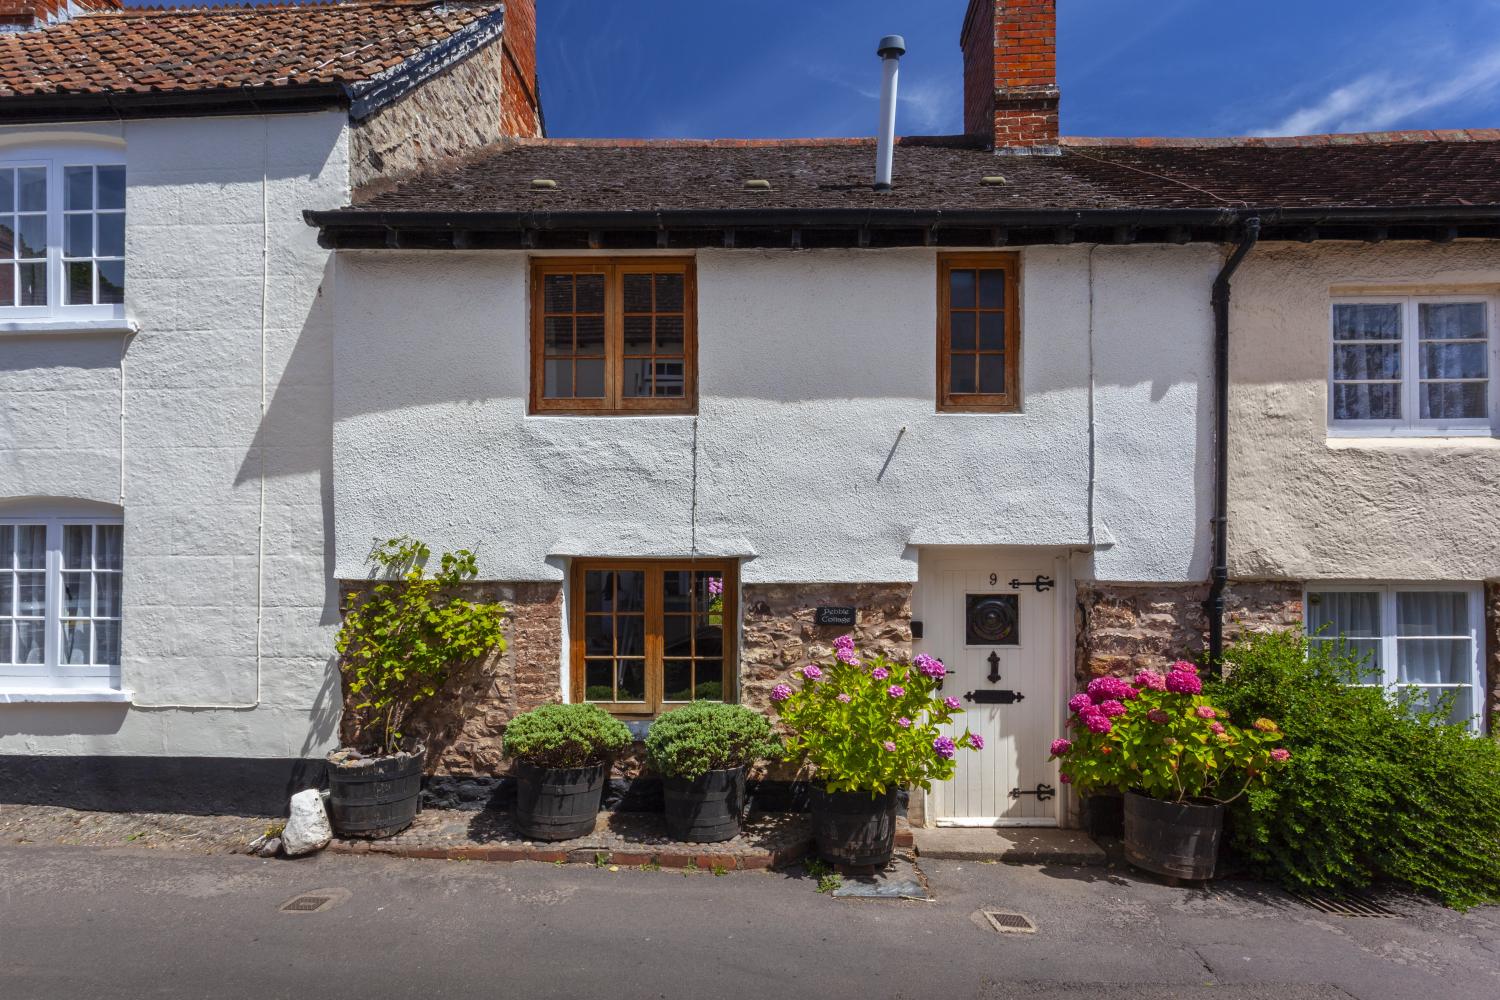 Pebble Cottage in Dunster